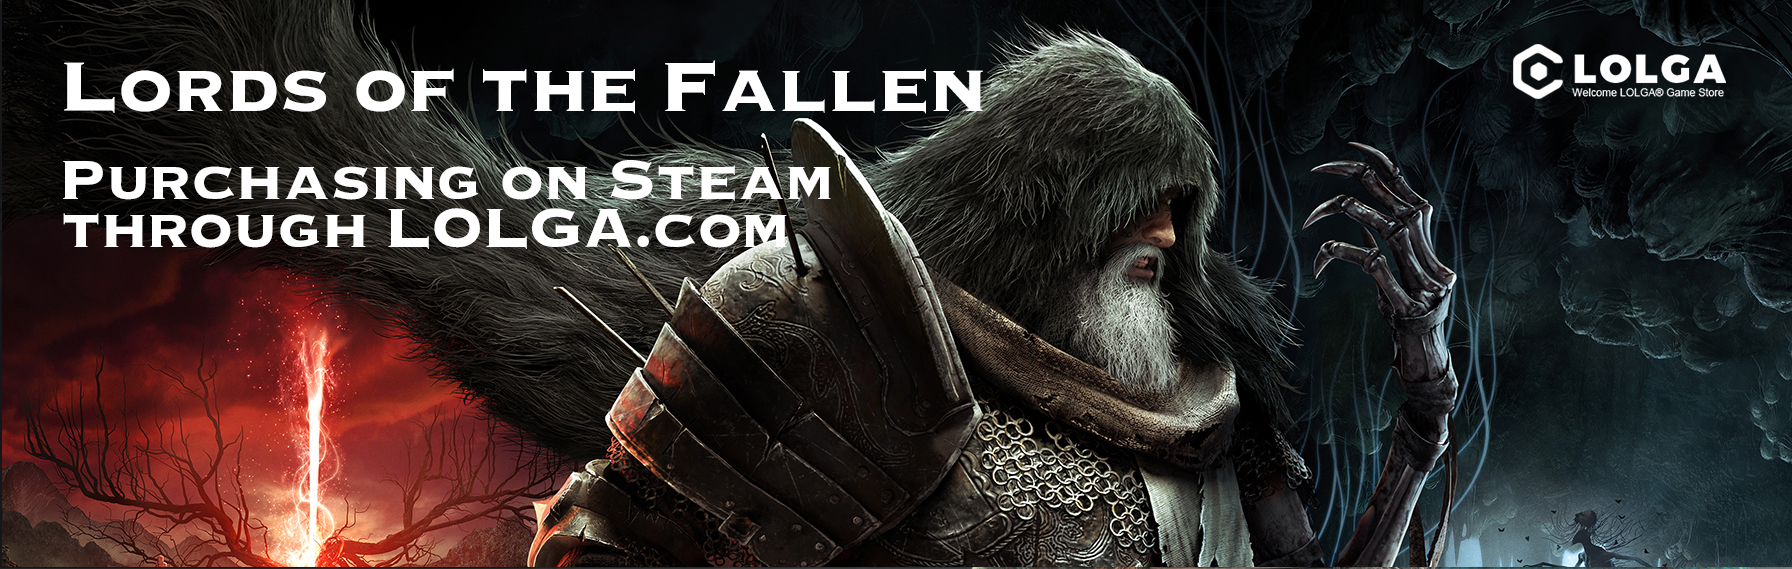 Lords of the Fallen: Purchasing on Steam through LOLGA.com